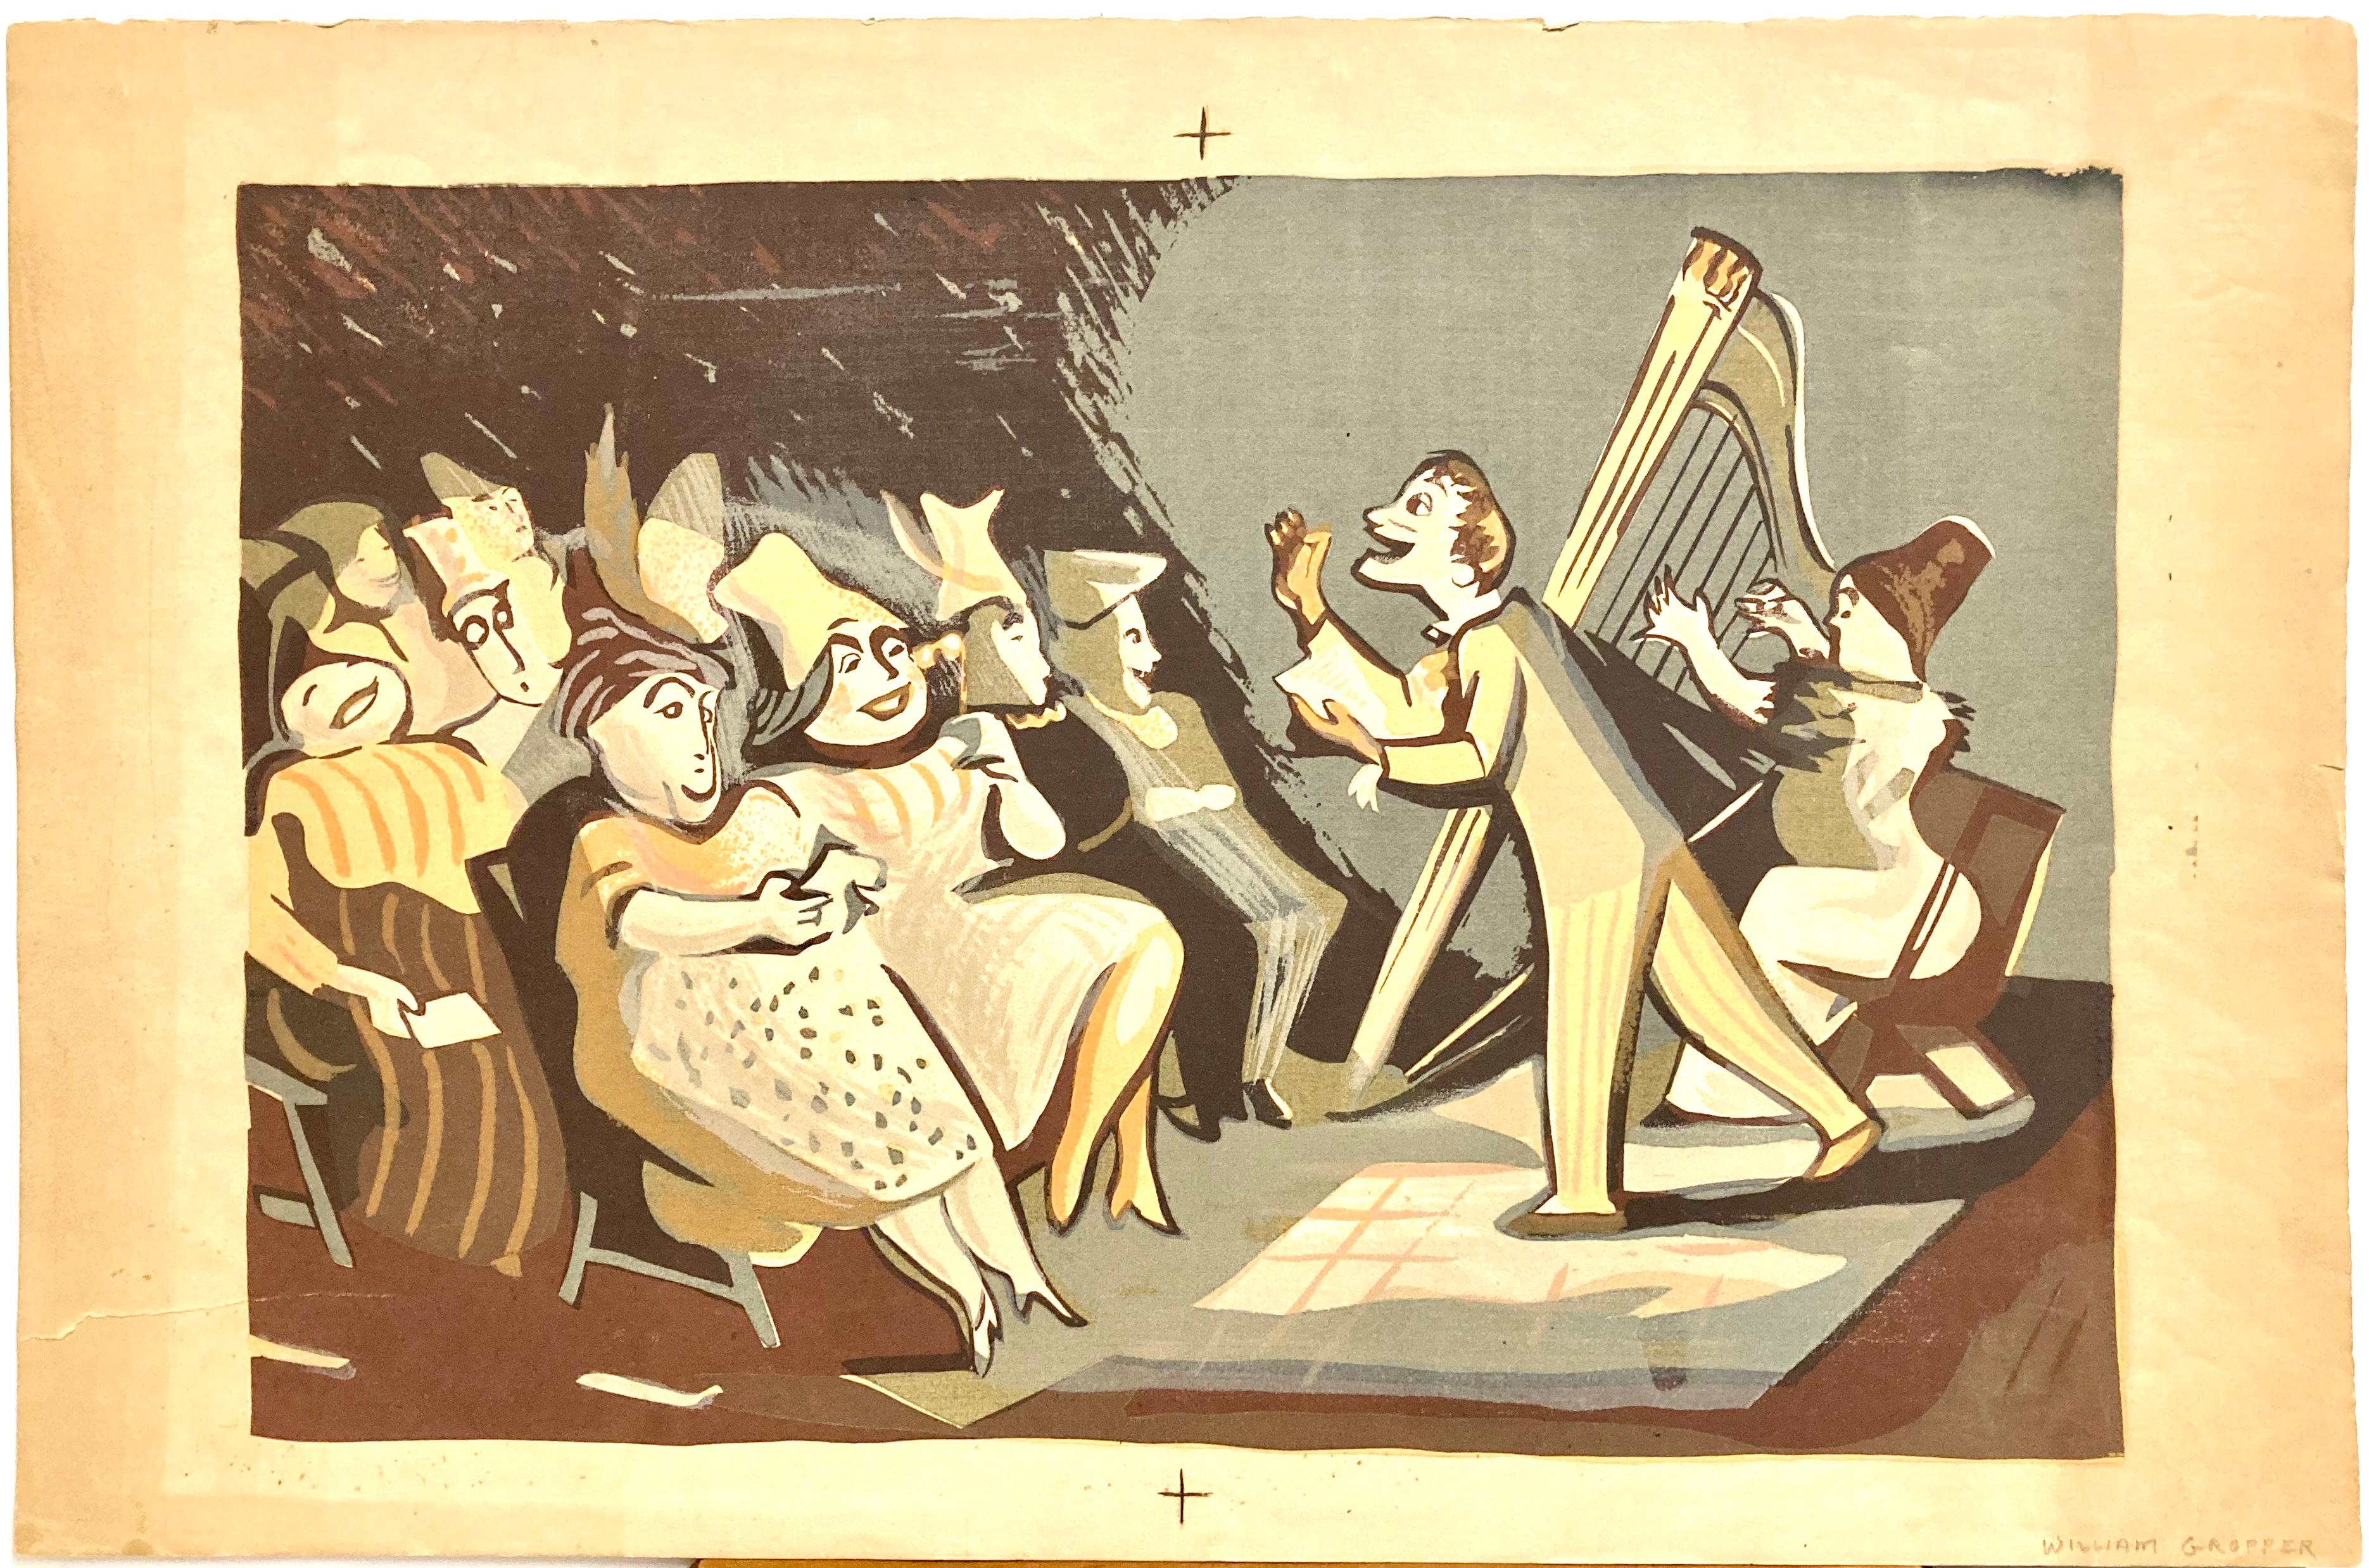 An early serigraph (screen print) by William Gropper. There's a harpist to provide the music and a choir master conducting. The seated members of the group are individually drawn as only someone as skilled as Gropper could make them.

'William